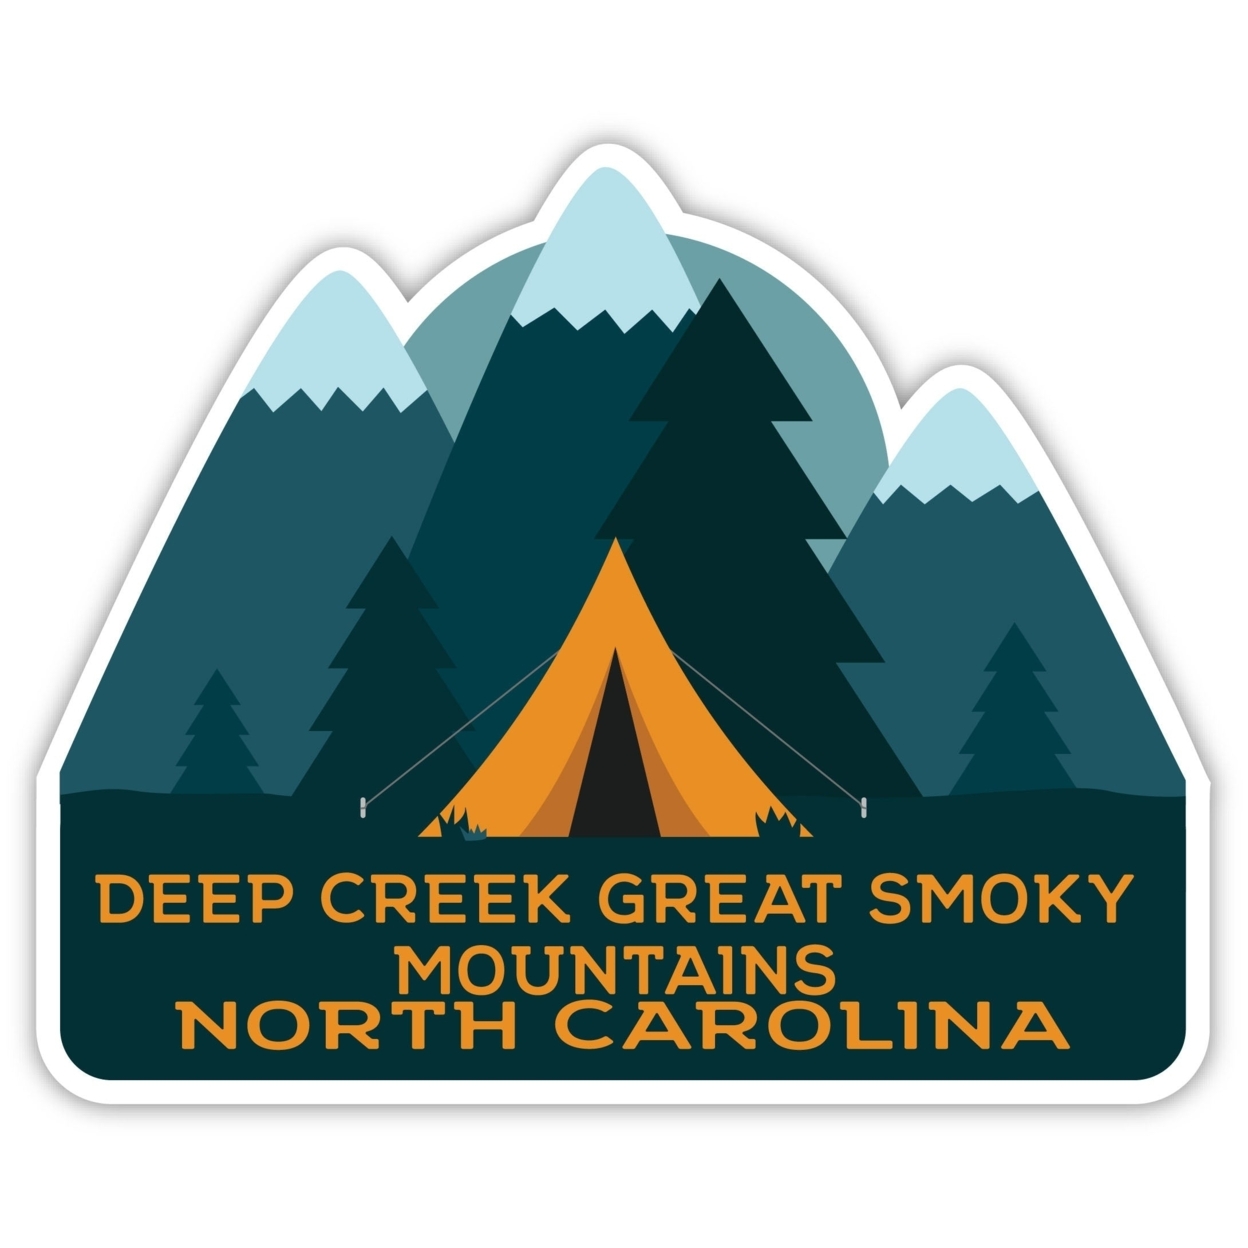 Deep Creek Great Smoky Mountains North Carolina Souvenir Decorative Stickers (Choose Theme And Size) - 4-Pack, 8-Inch, Tent